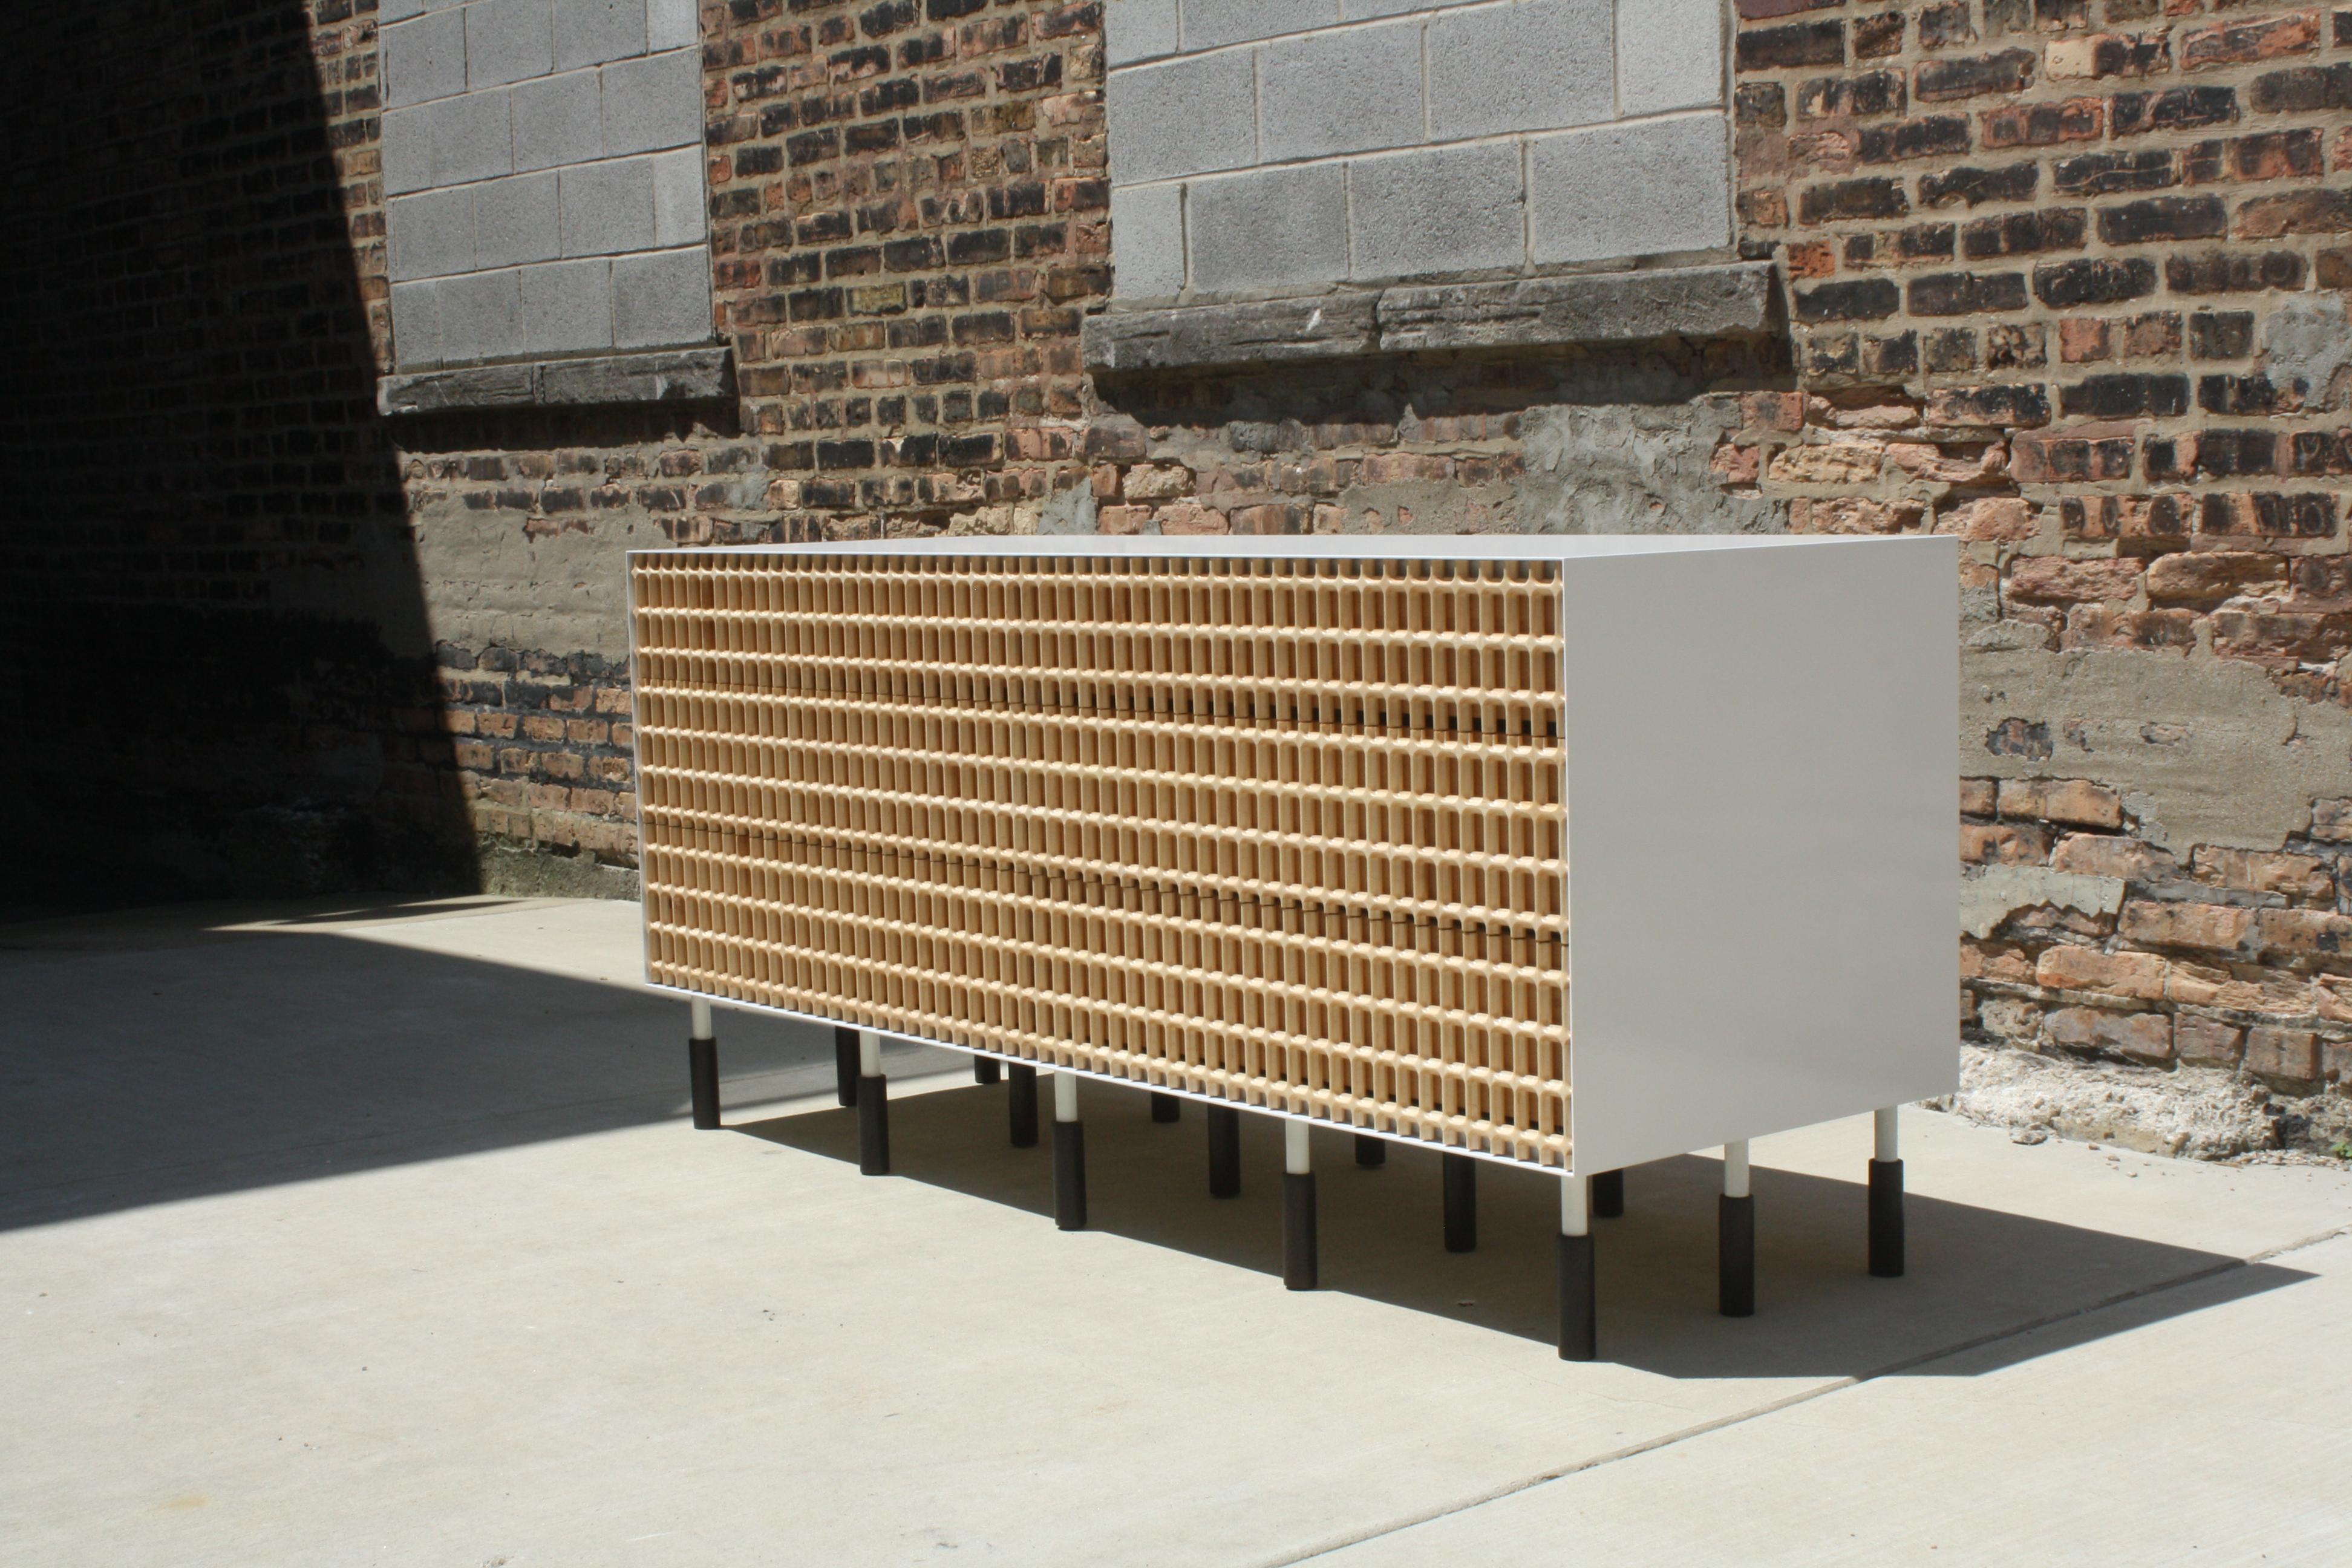 Carved maple lattice, gloss white powder-coated steel, and oxidized walnut

shown with:
6 drawers, measures: 72” W x 32” H x 24” D (pricing reflects this sizing)
3 drawers, measures: 36